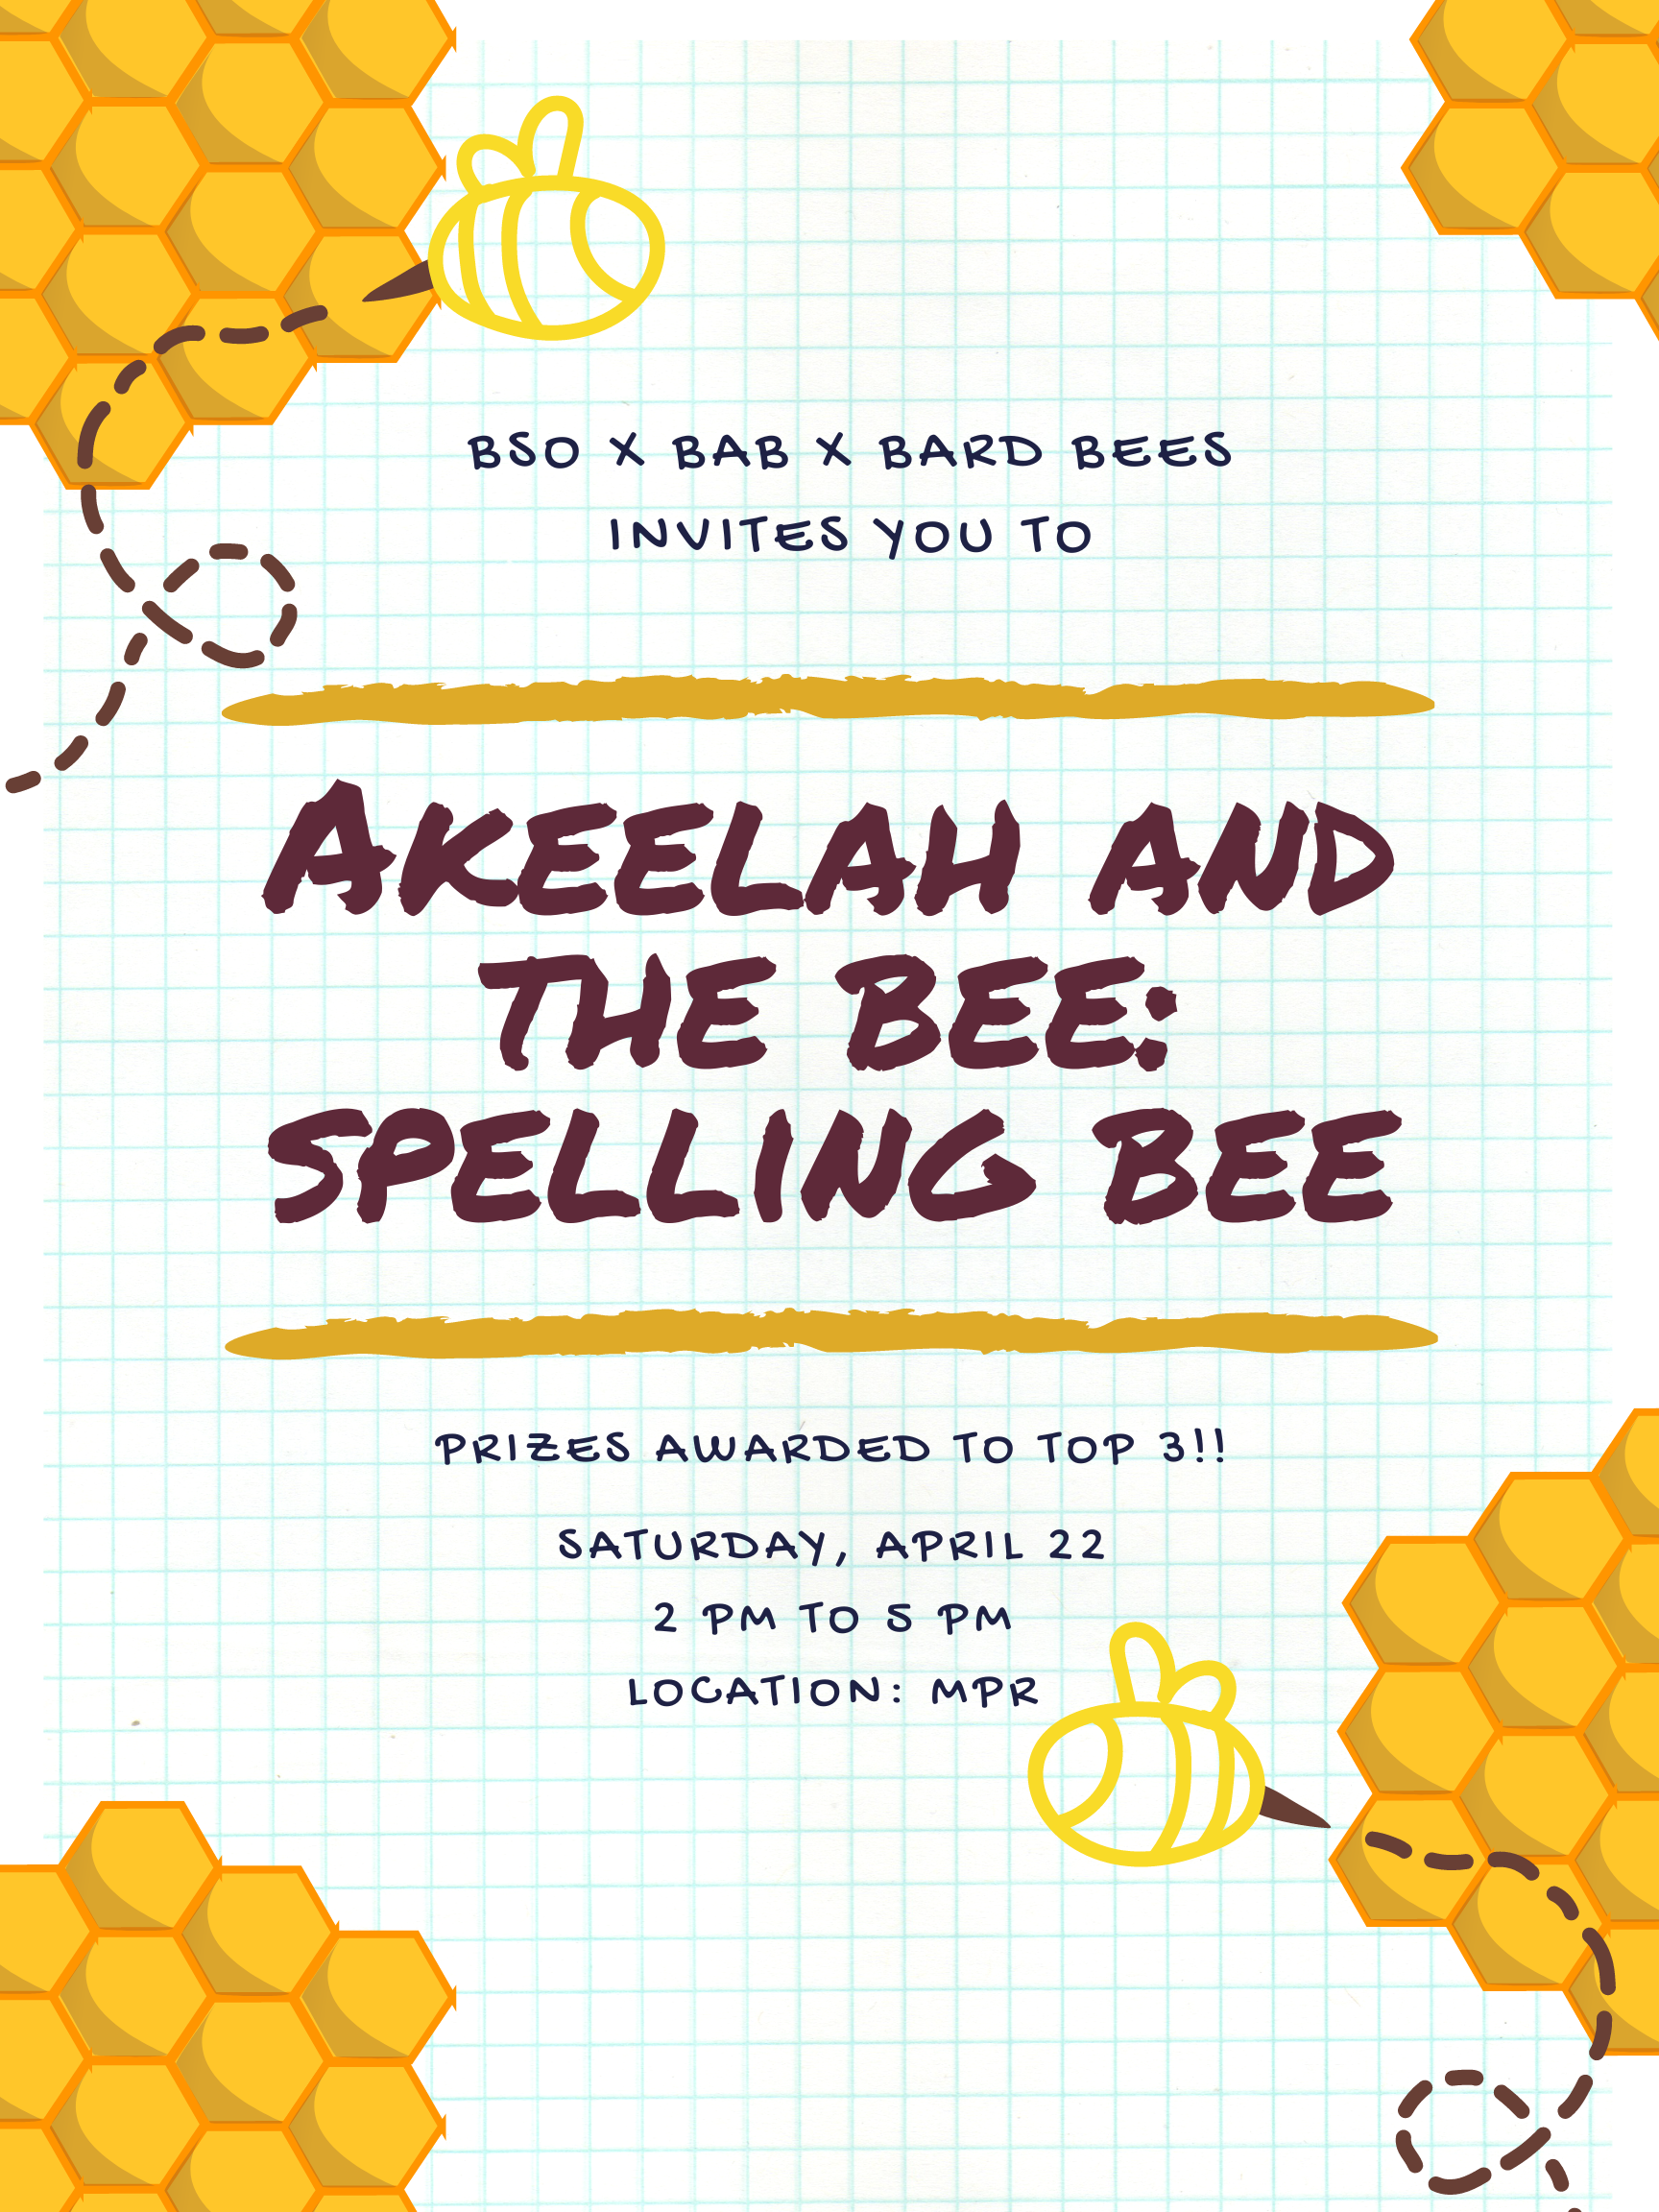 Akeelah and the Bee: Annual Spelling Bee